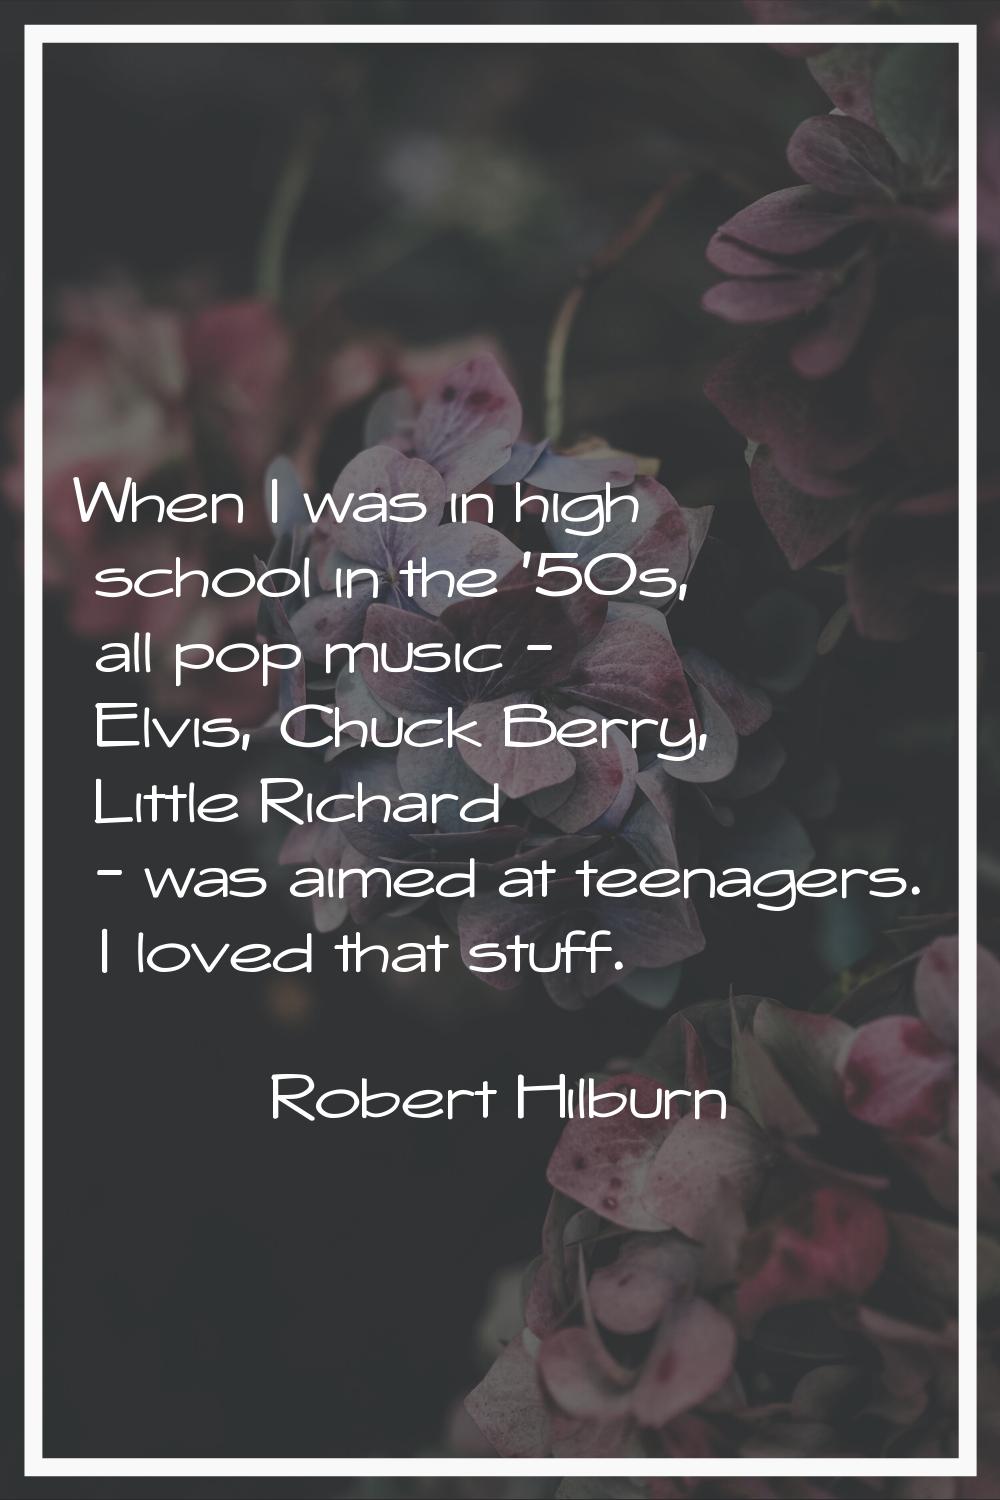 When I was in high school in the '50s, all pop music - Elvis, Chuck Berry, Little Richard - was aim